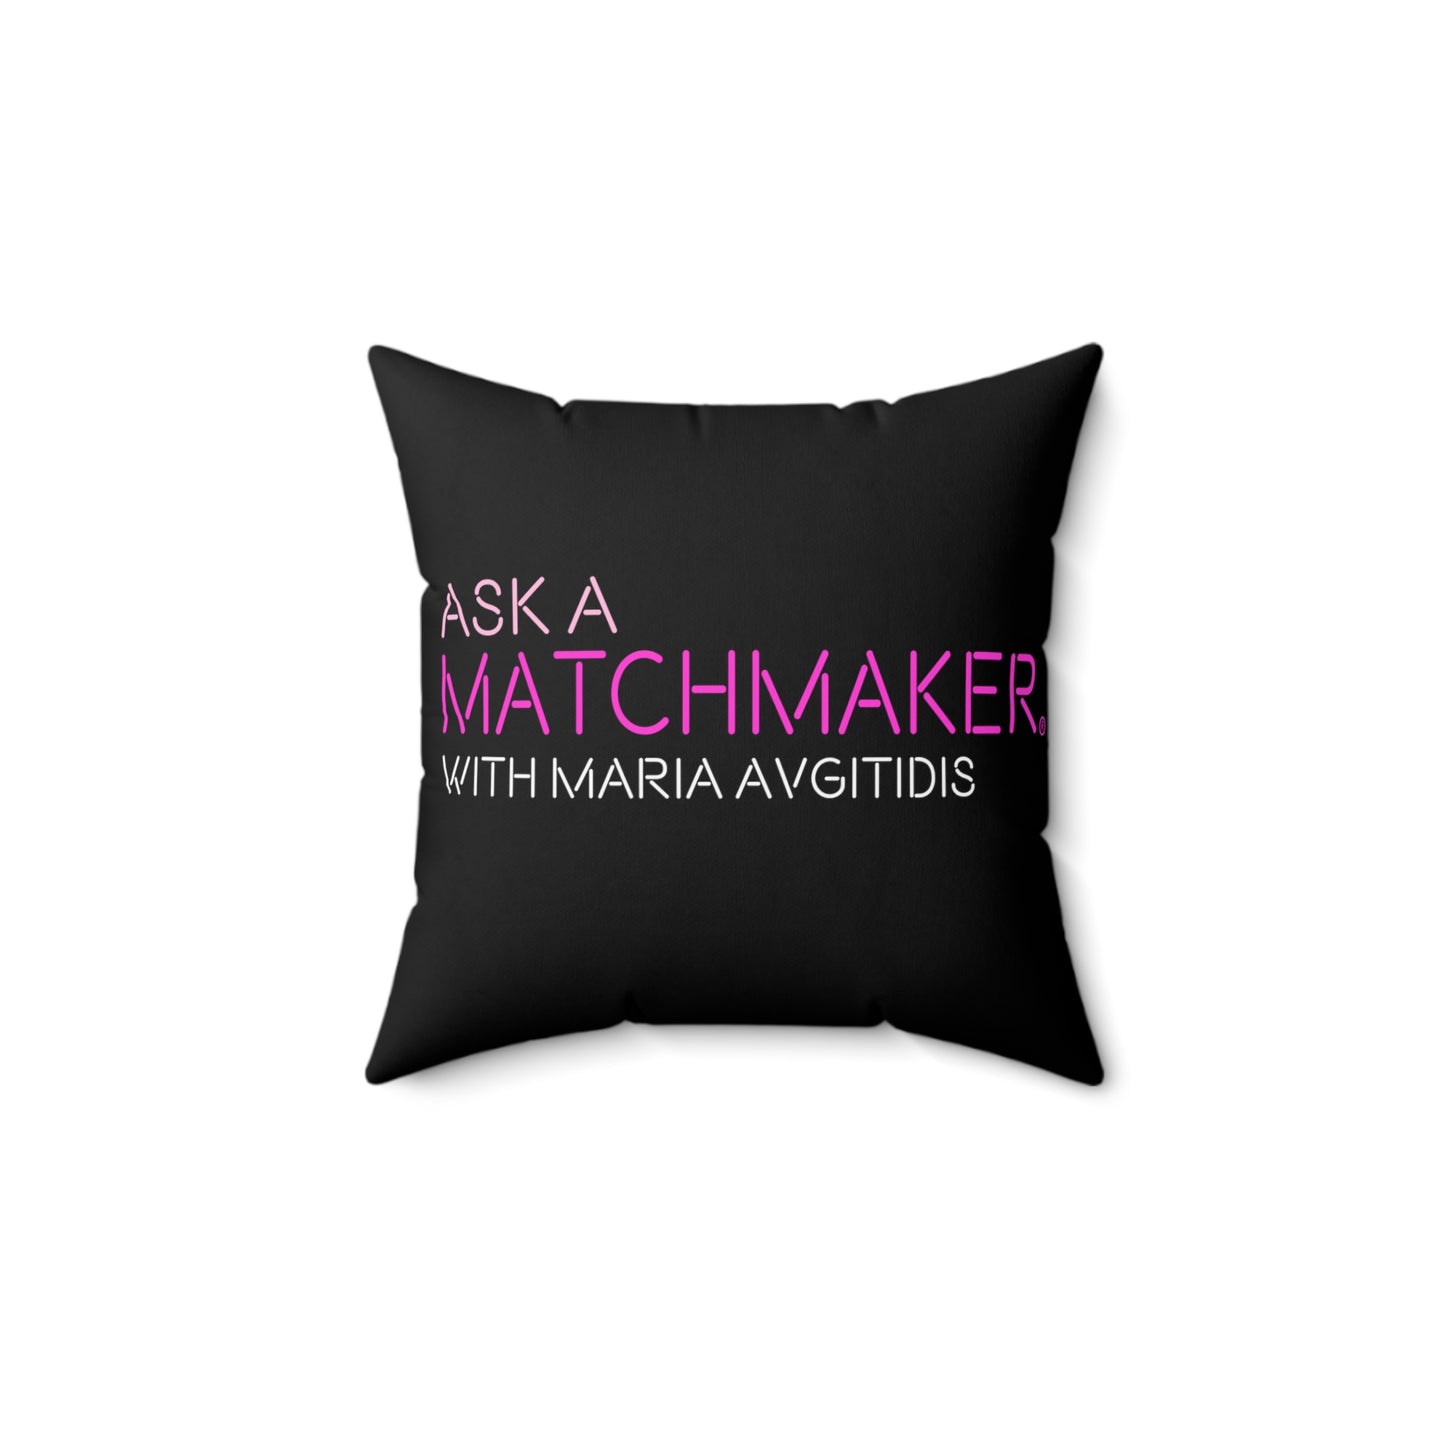 Ask a Matchmaker Square Pillow